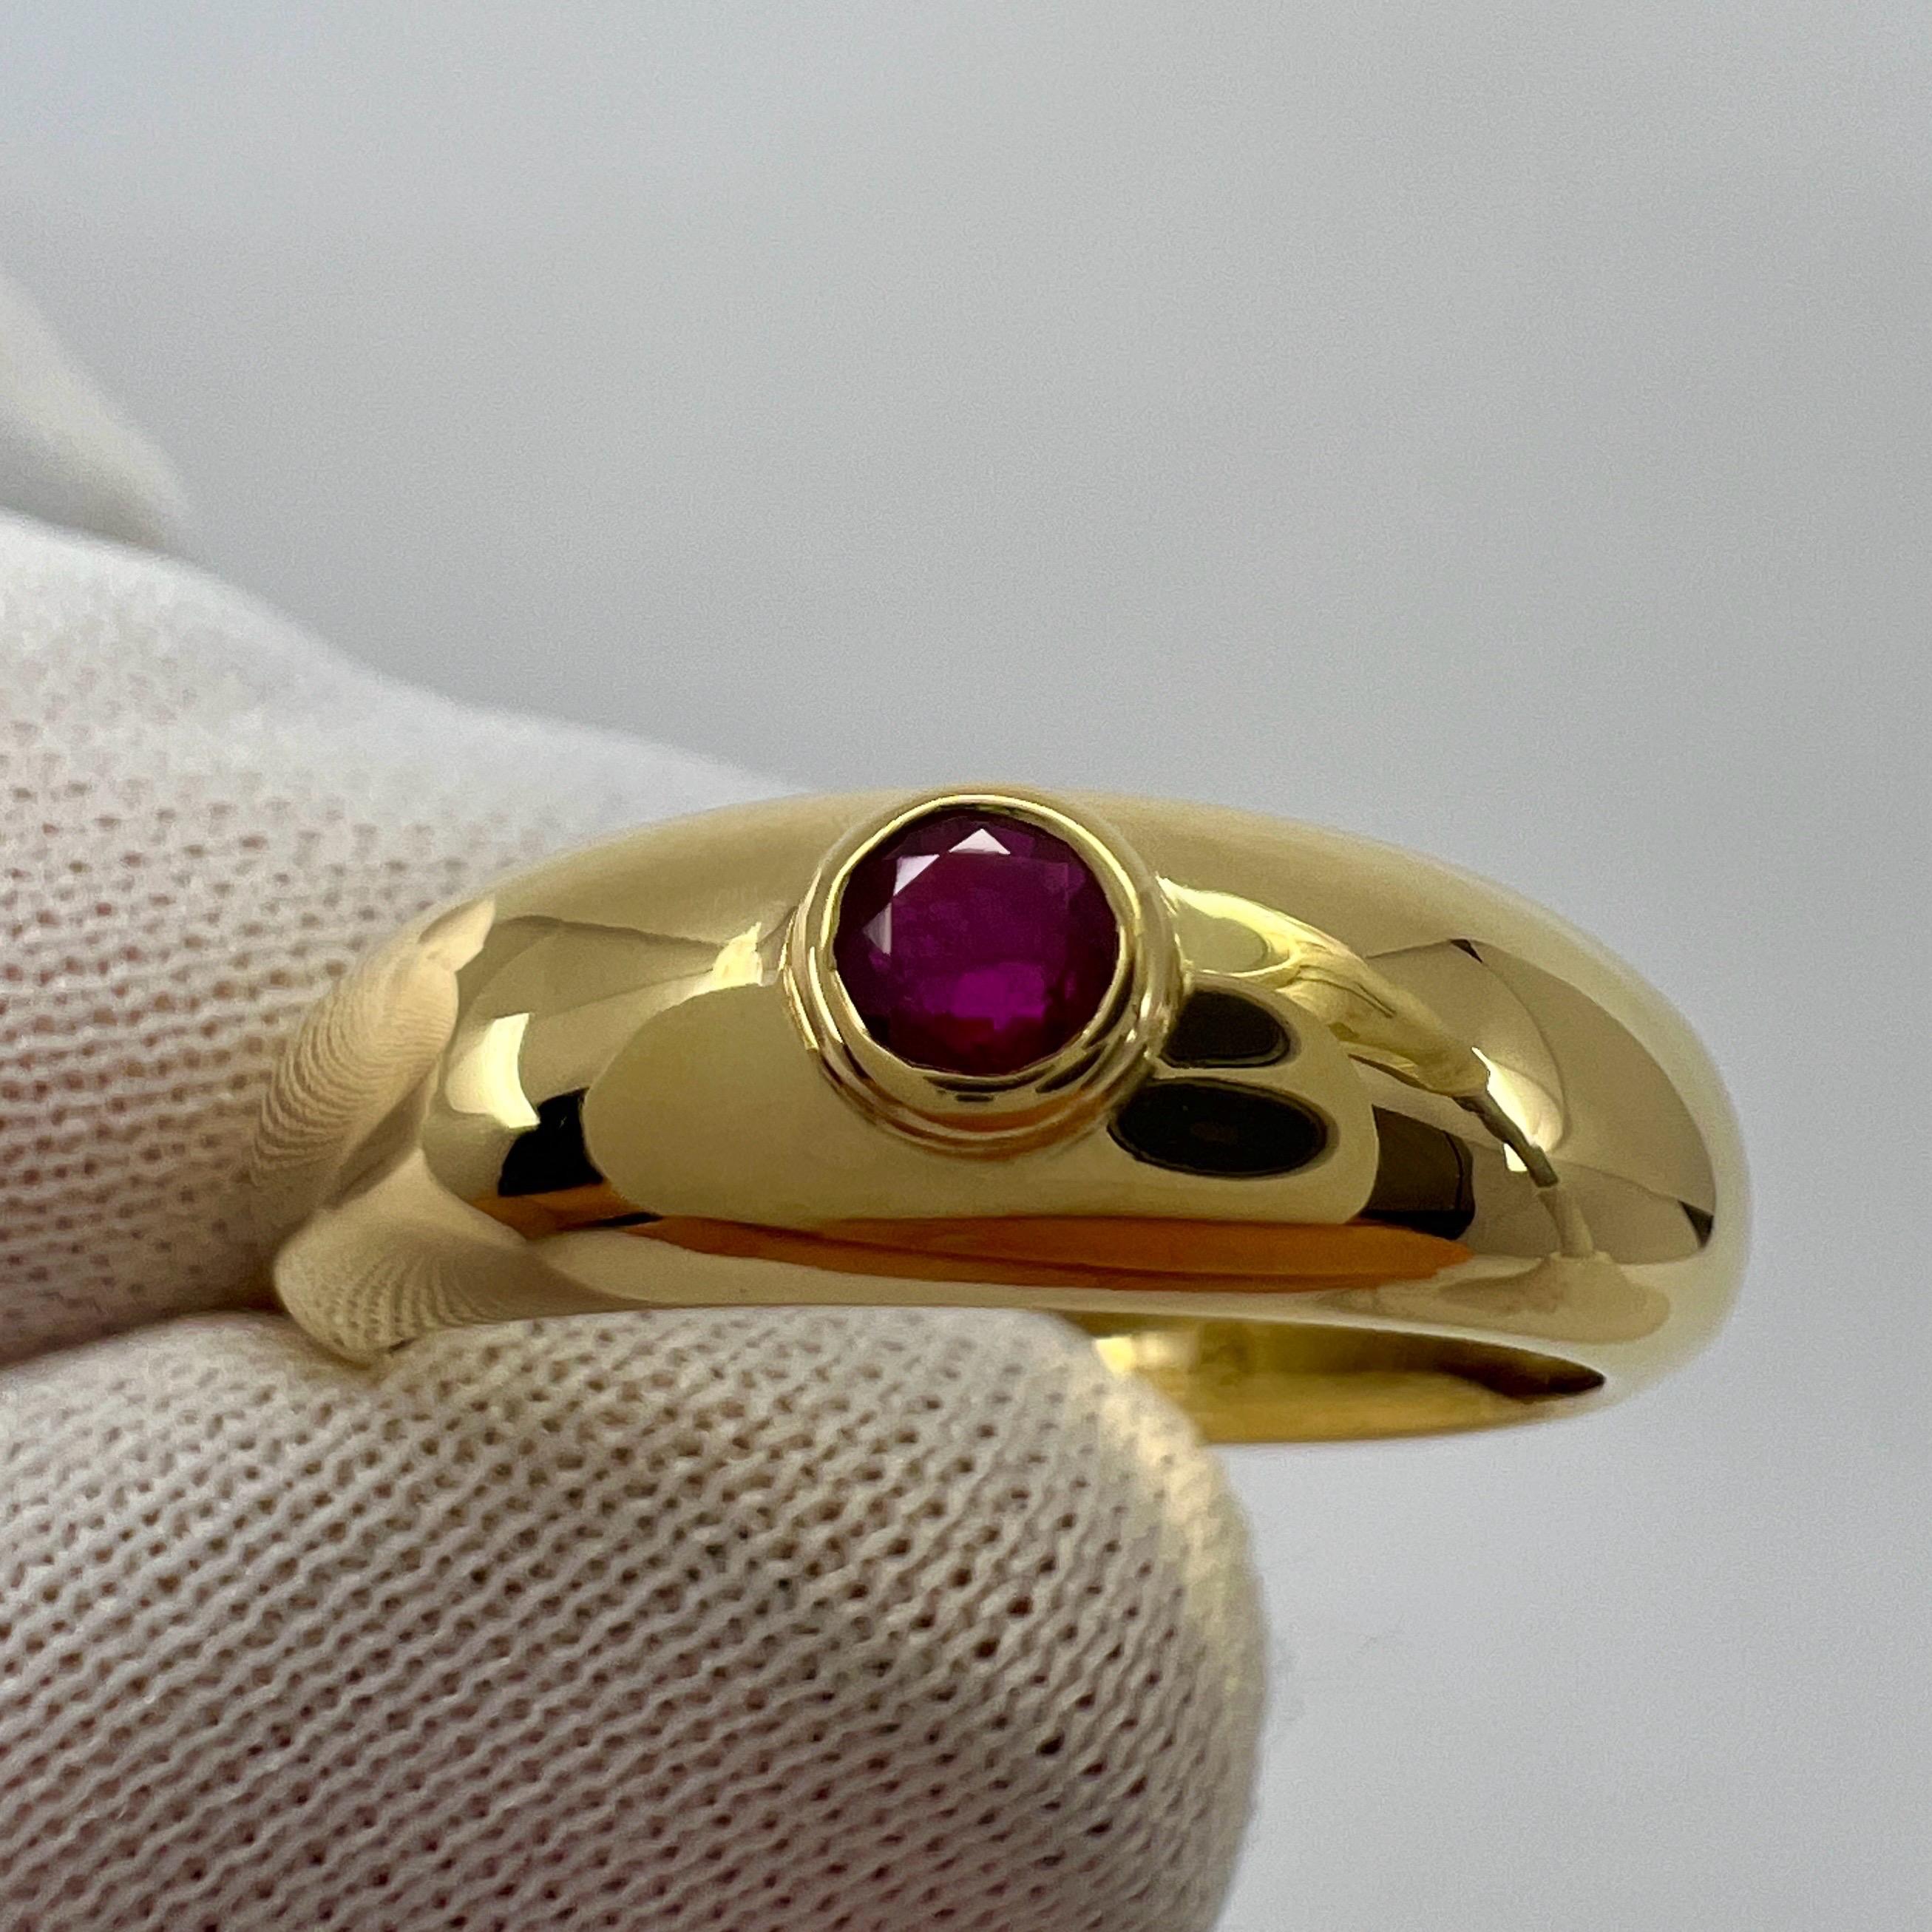 Women's or Men's Vintage Cartier Round Cut Red Ruby 18k Yellow Gold Signet Style Domed Ring US5.5 For Sale